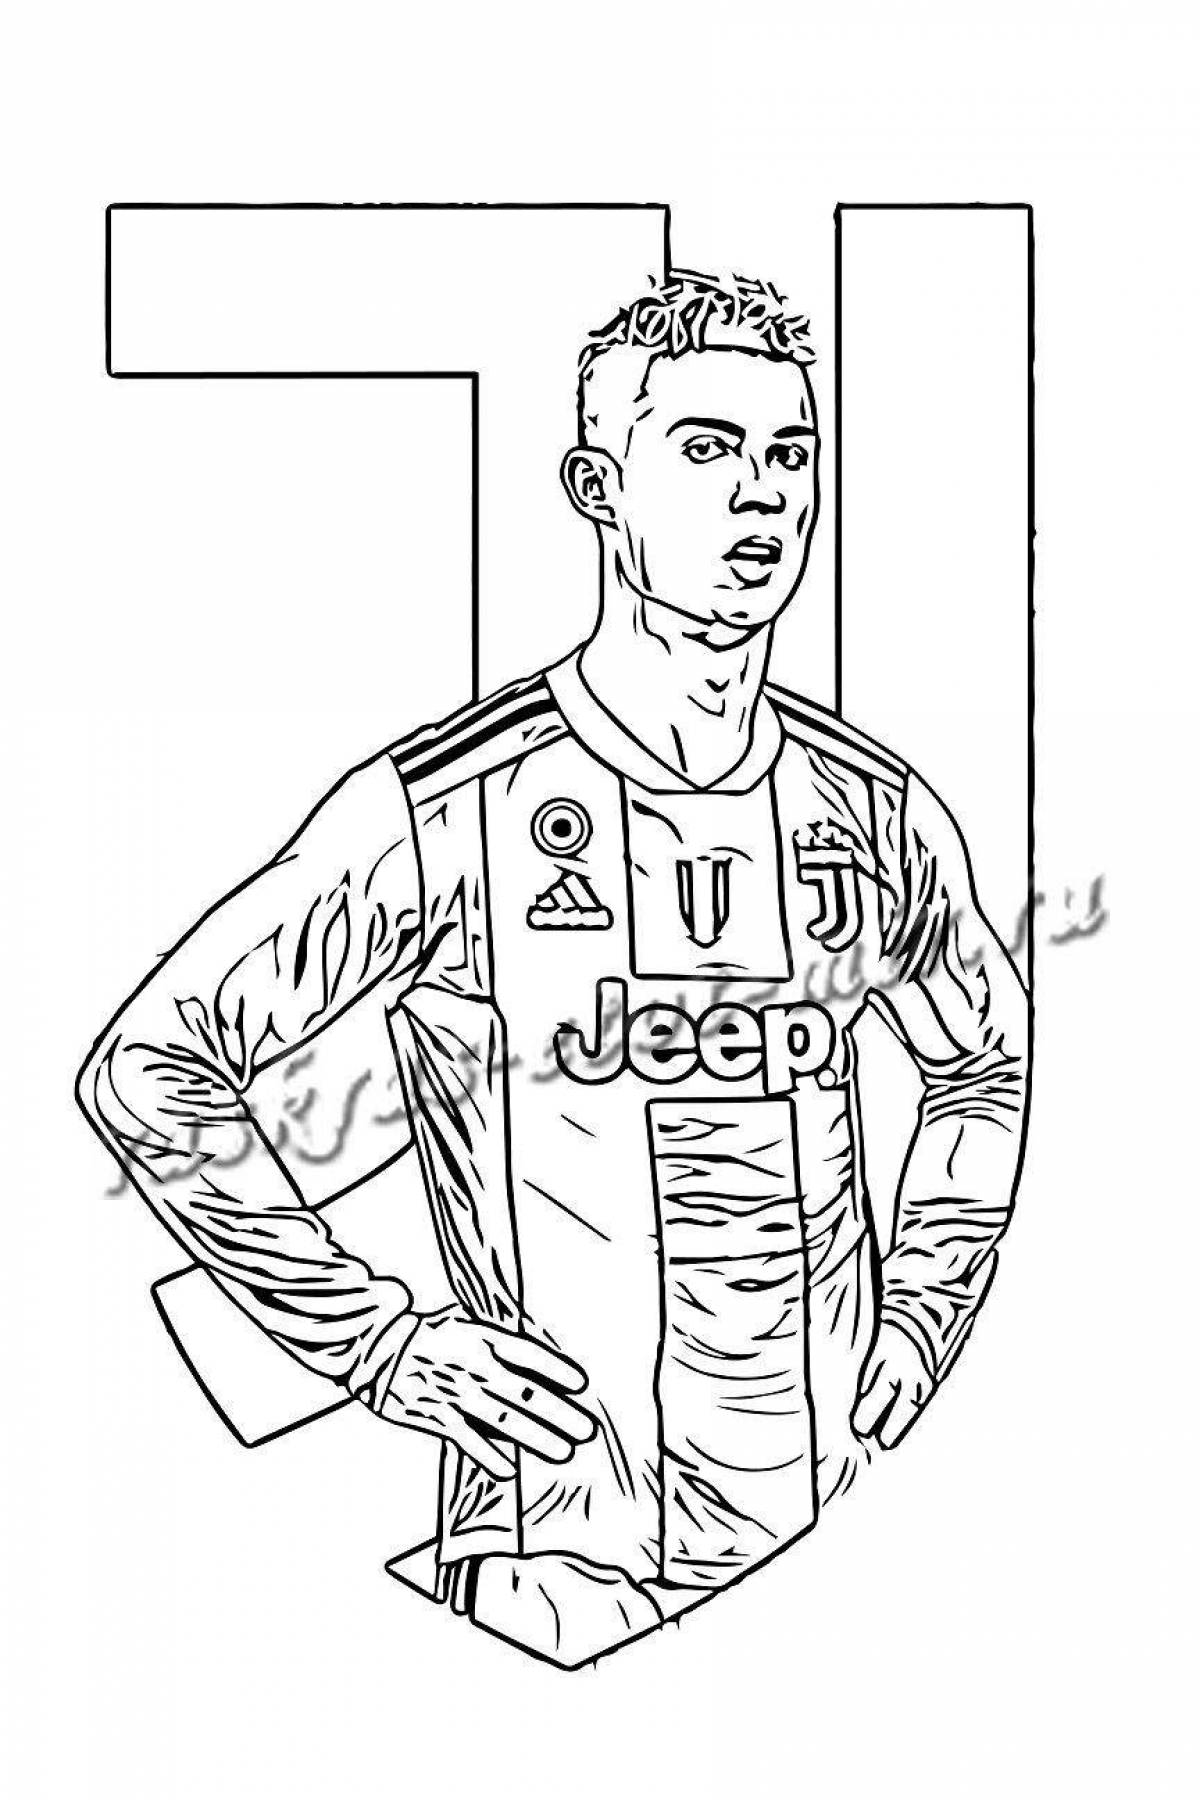 Coloring page charming soccer player ronaldo